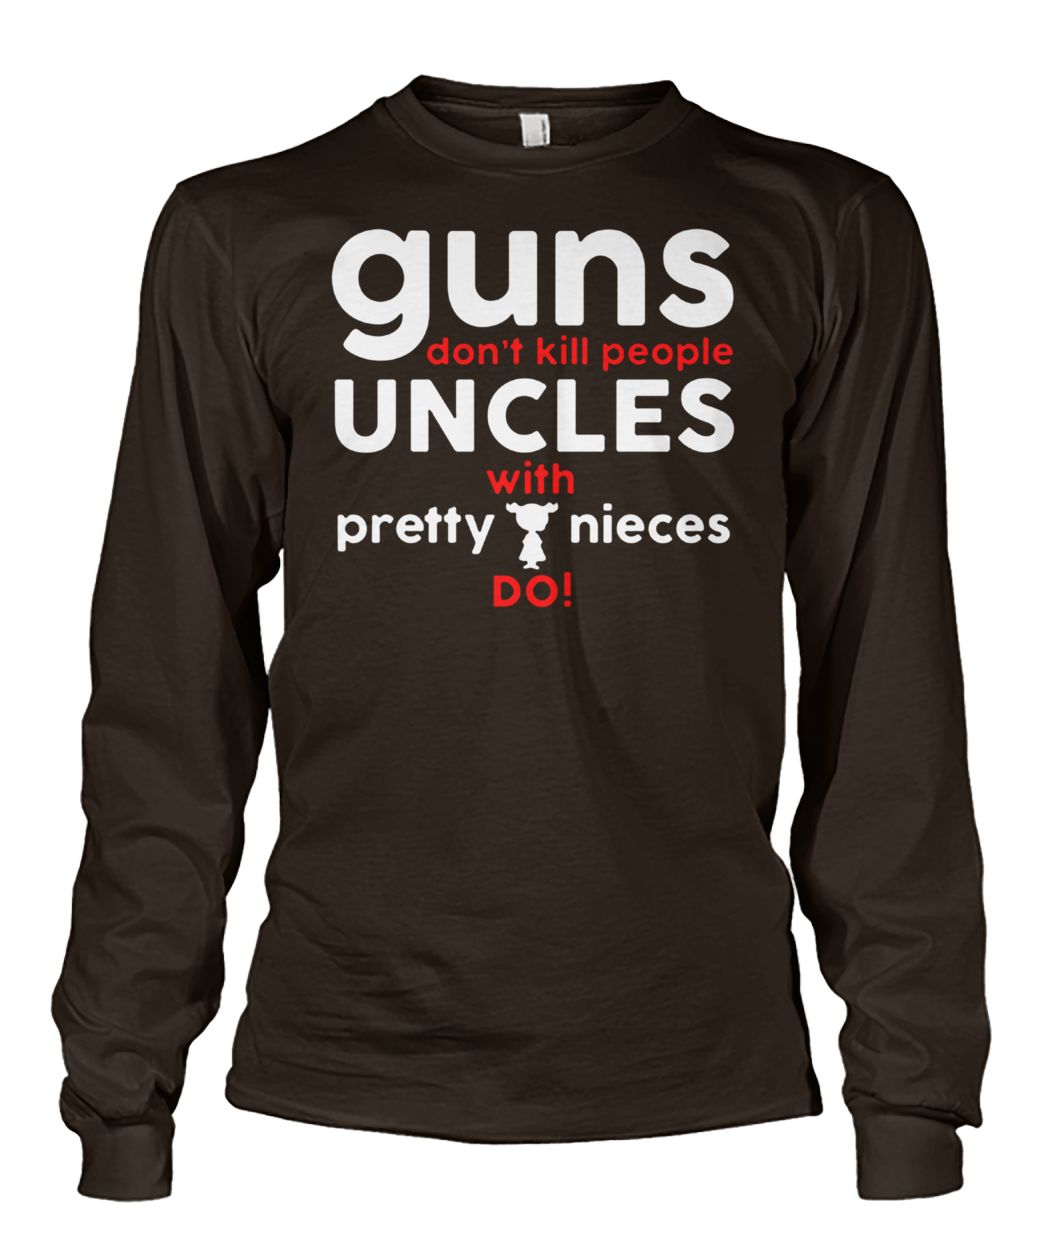 Guns don't kill people uncles with pretty nieces do unisex long sleeve